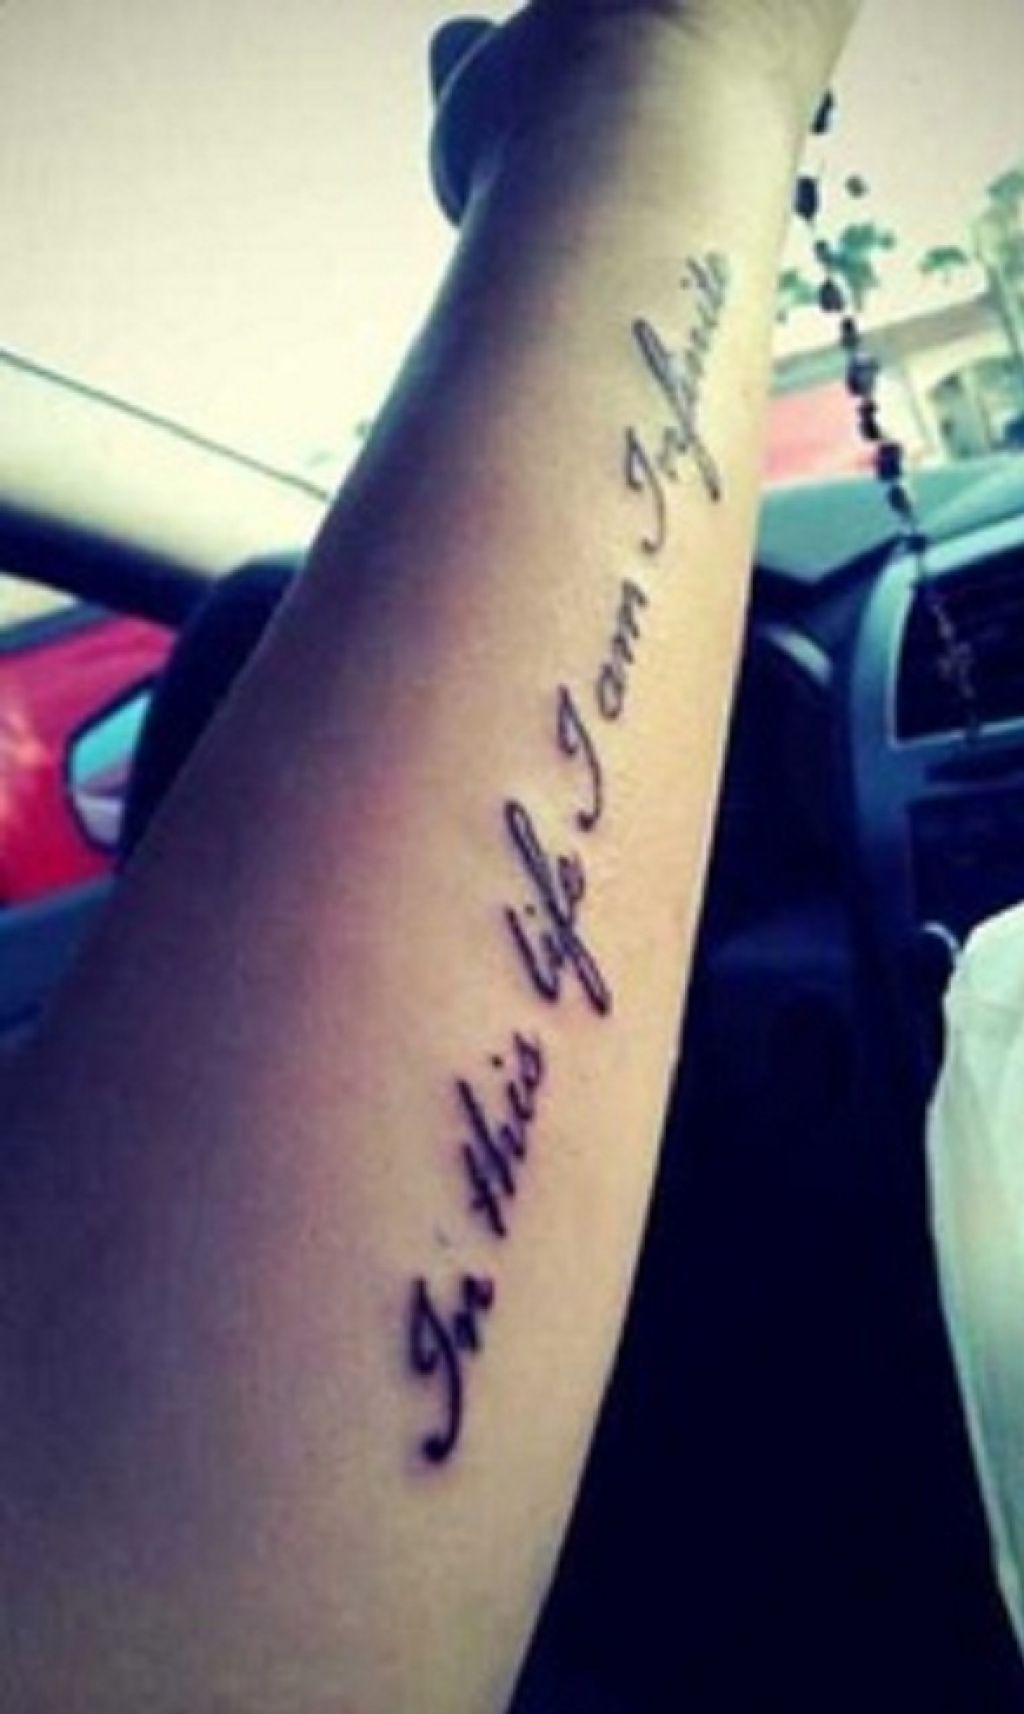 Meaningful Tattoo Quotes - Lemon8 Search